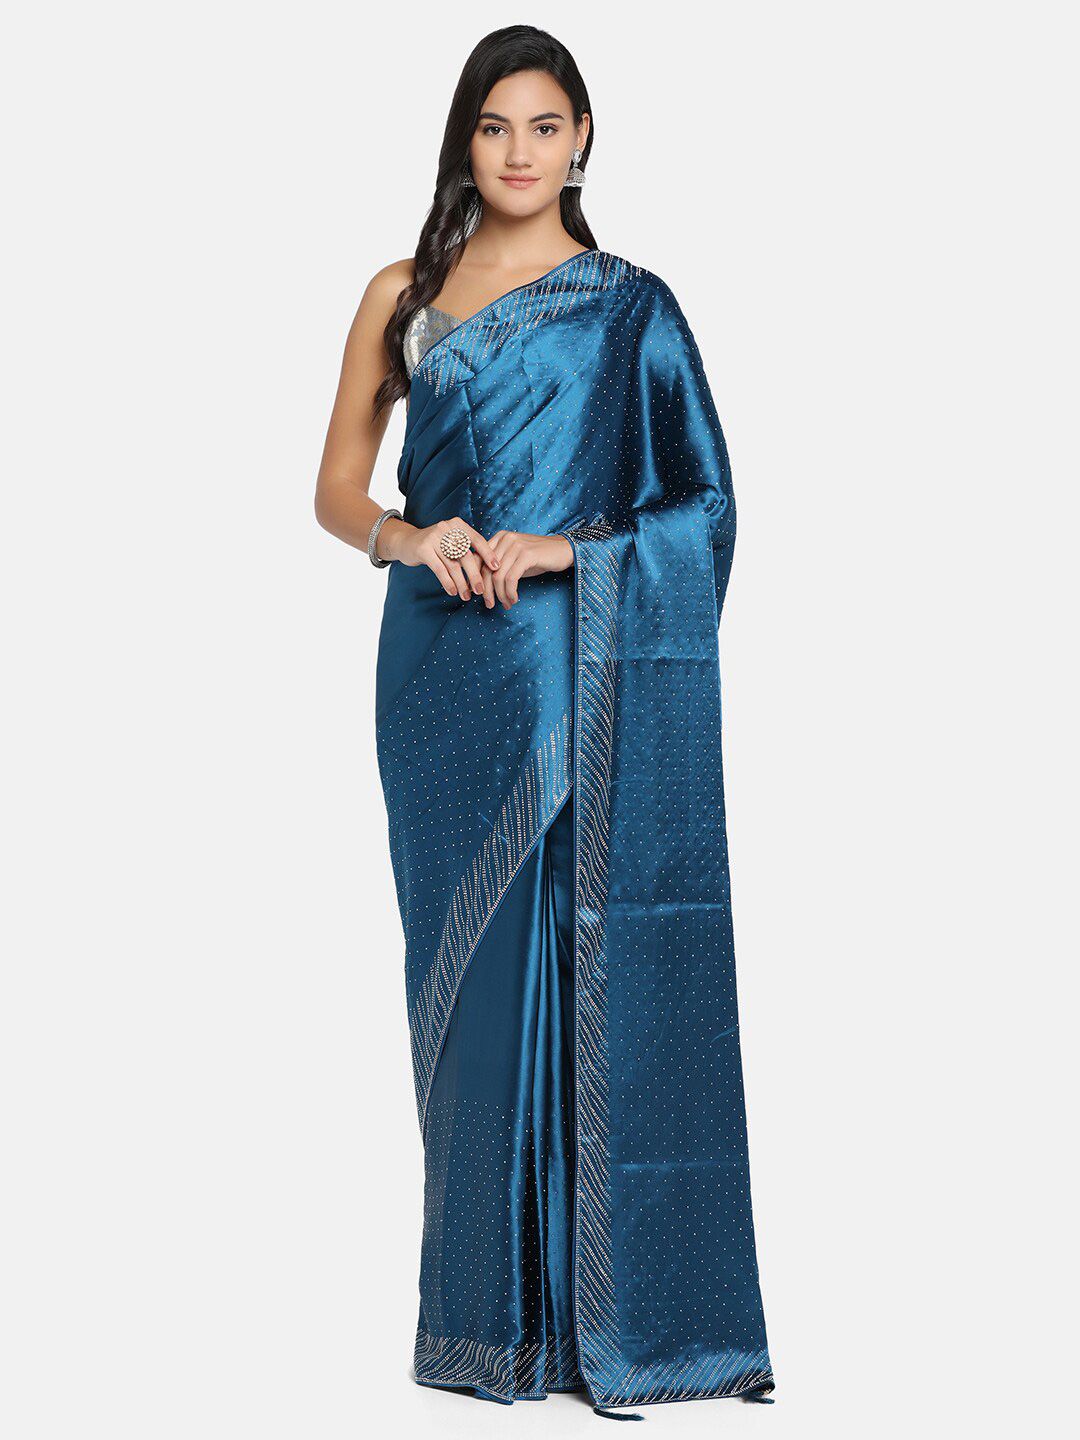 BOMBAY SELECTIONS Blue Embellished Beads and Stones Satin Saree Price in India